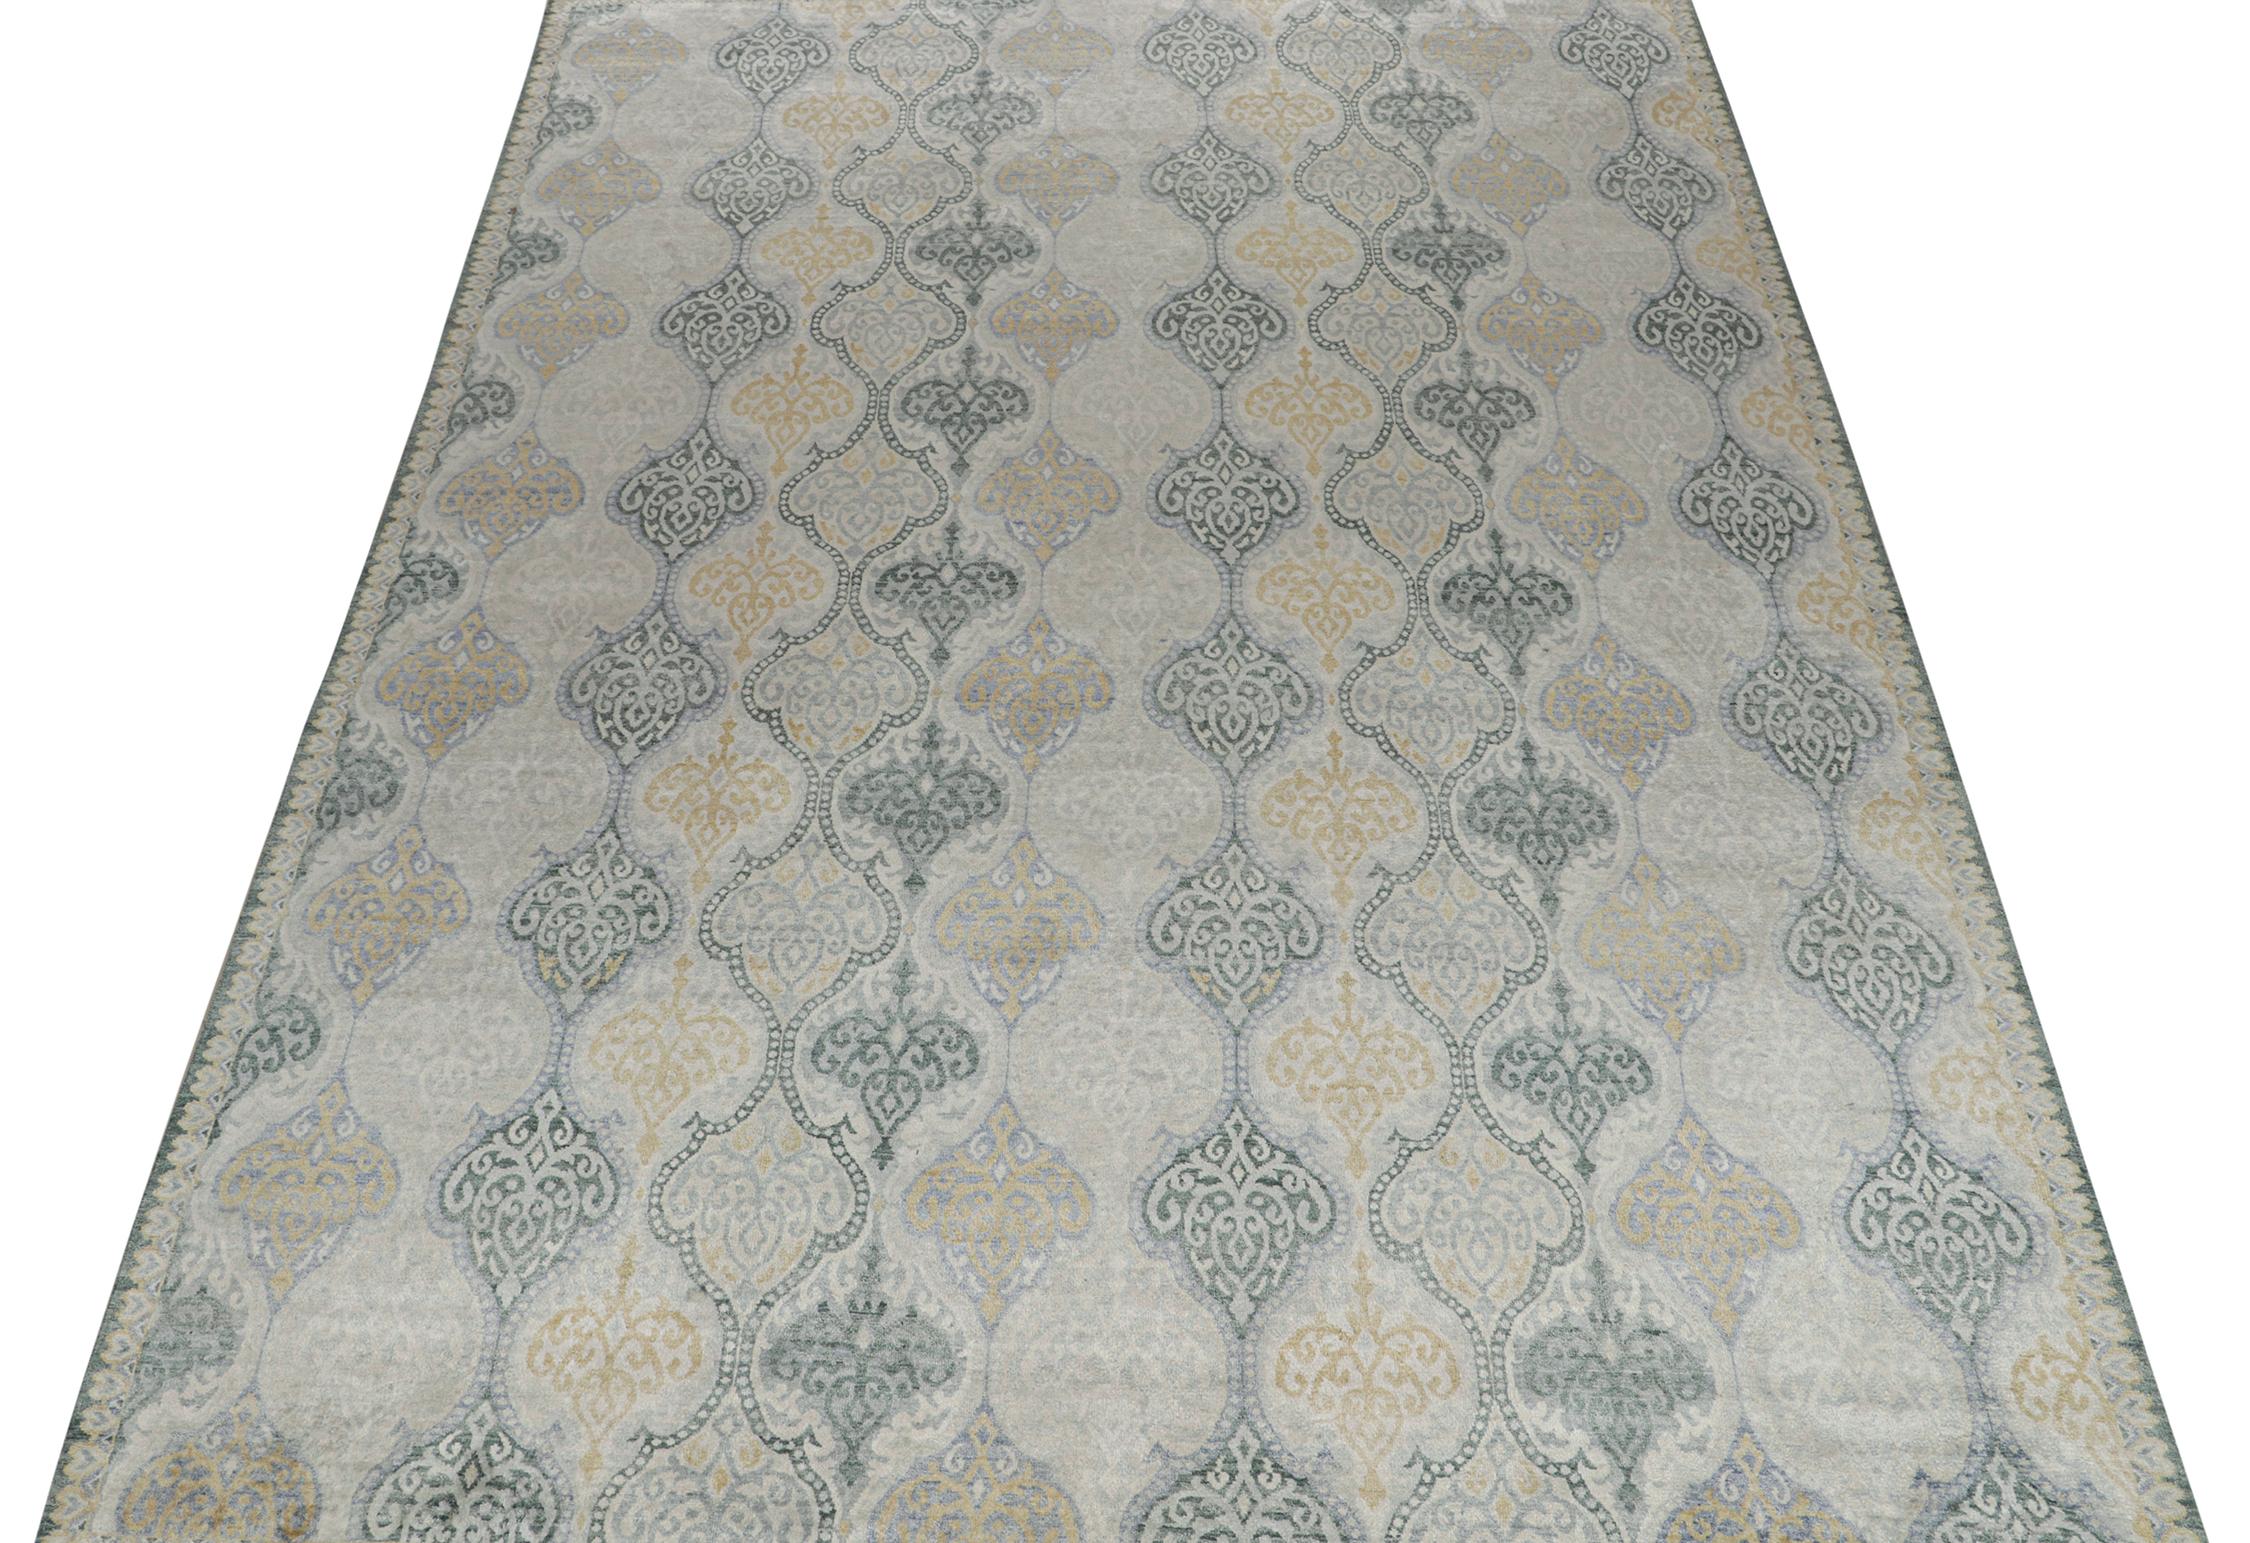 A 9x12 rug inspired from traditional rug styles, from Rug & Kilim’s Modern Classics Collection. Hand-knotted in wool, playing a confluence of gray, beige, blue and gold floral patterns with classic grace.
Further on the design:
Keen eyes will